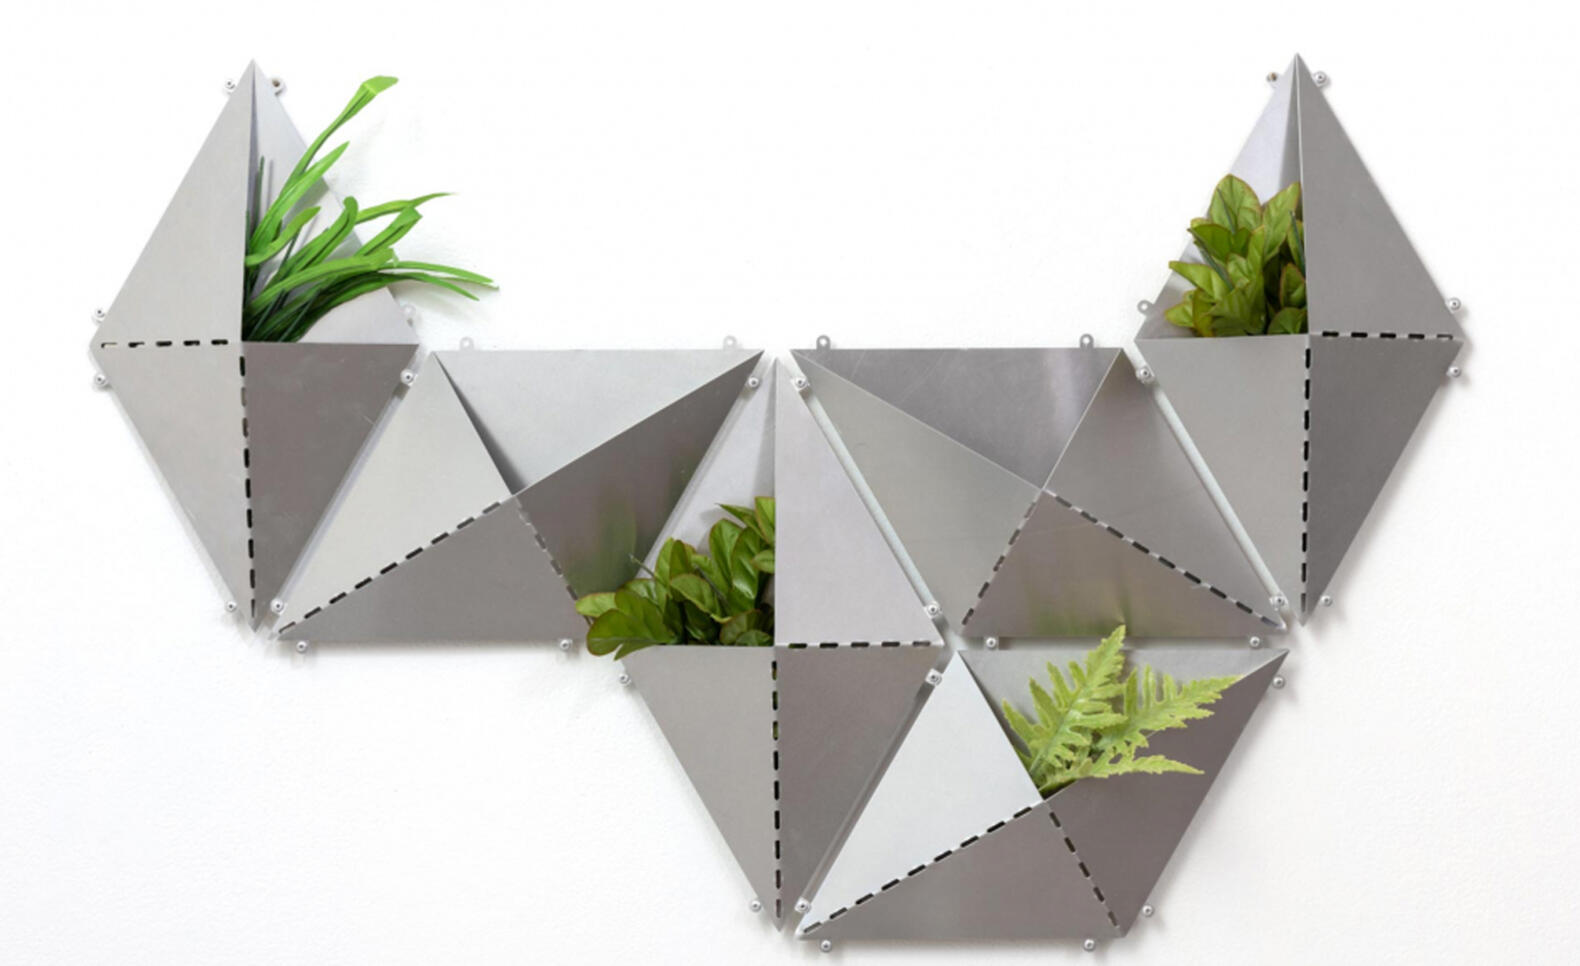 Laser cut aluminum piece made up of different rhombus shapes with plants in them ; Erin Moren